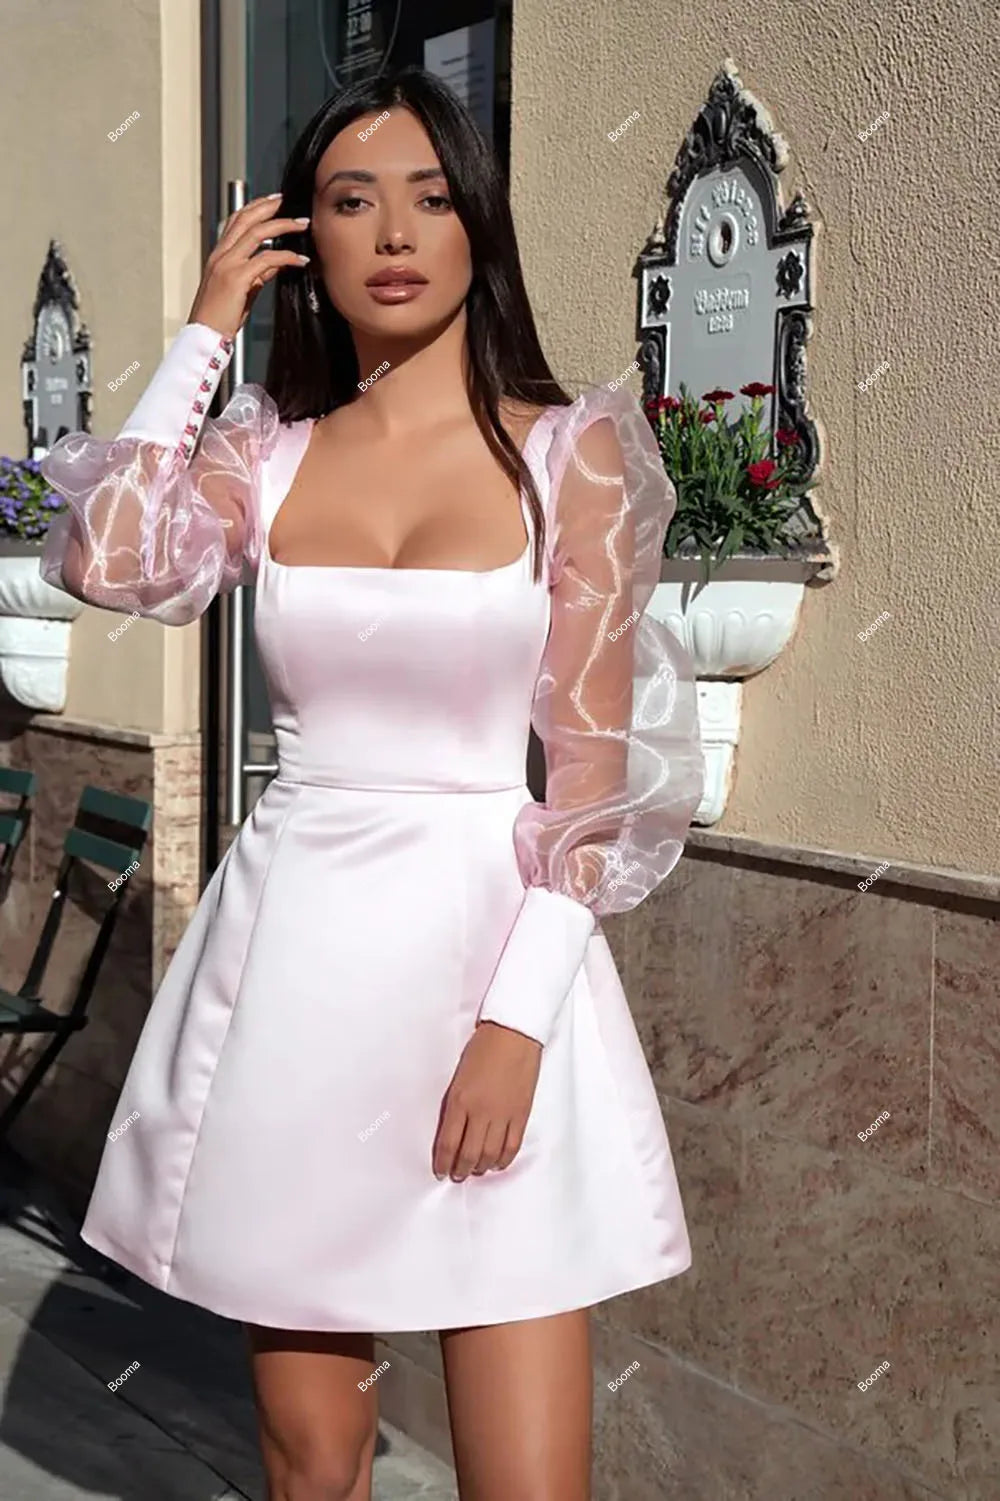 Short Wedding Party Dresses Square Collar Long Puff Sleeves Mini Brides Gowns for Women Button A-Line Cocktail Dress